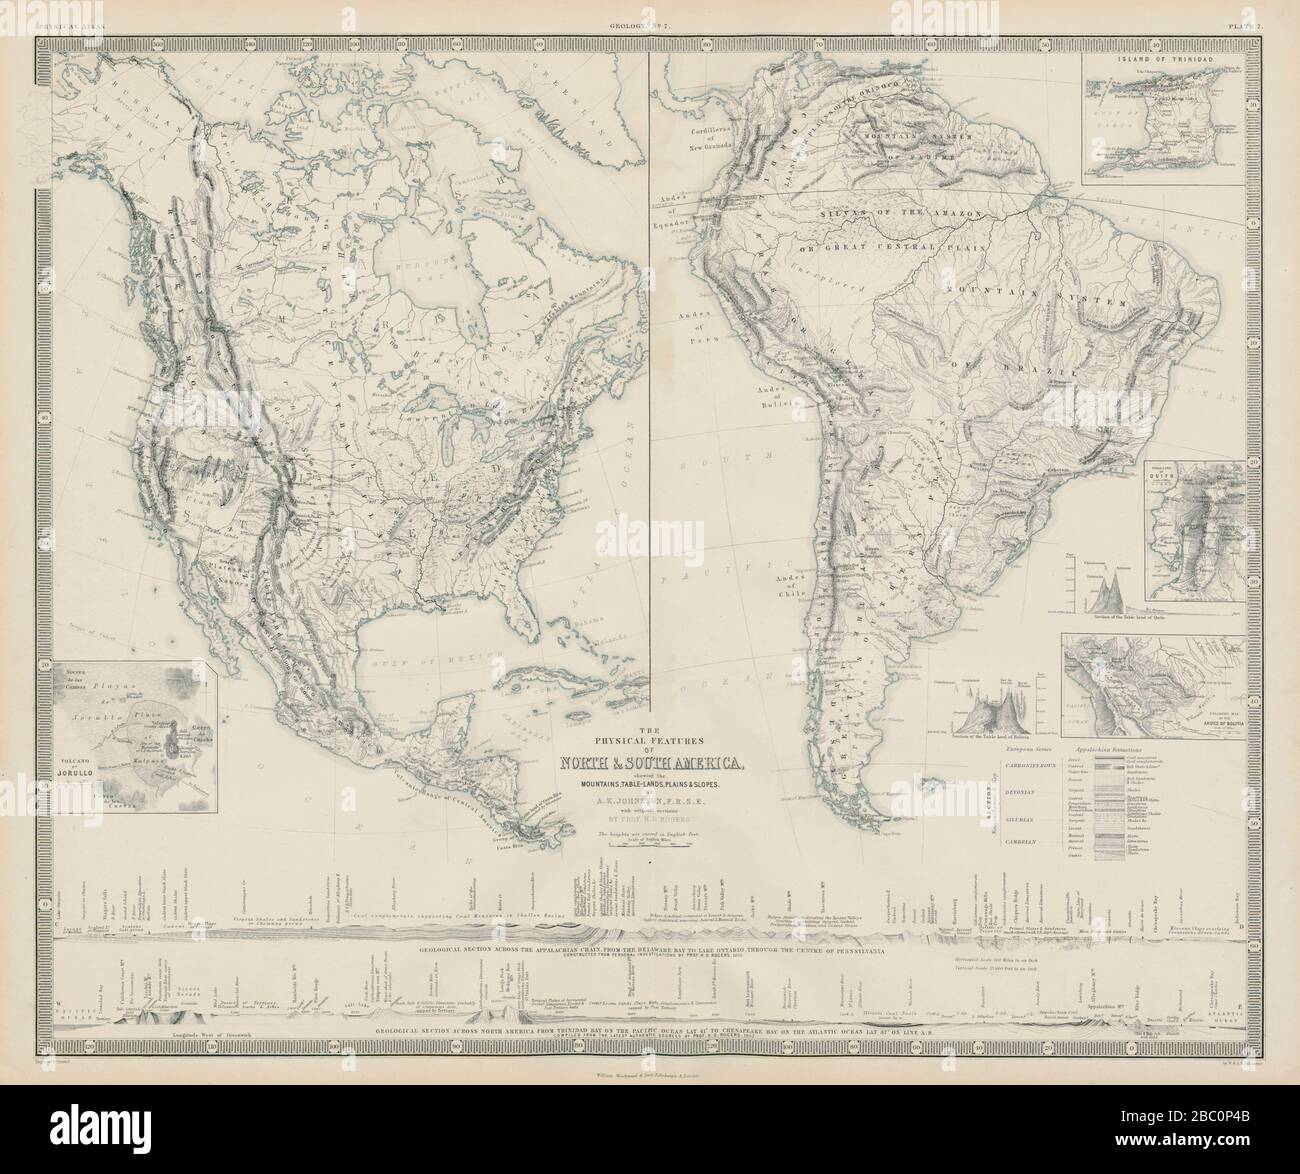 Physical Features of North & South America. Mountains rivers sections 1856 map Stock Photo